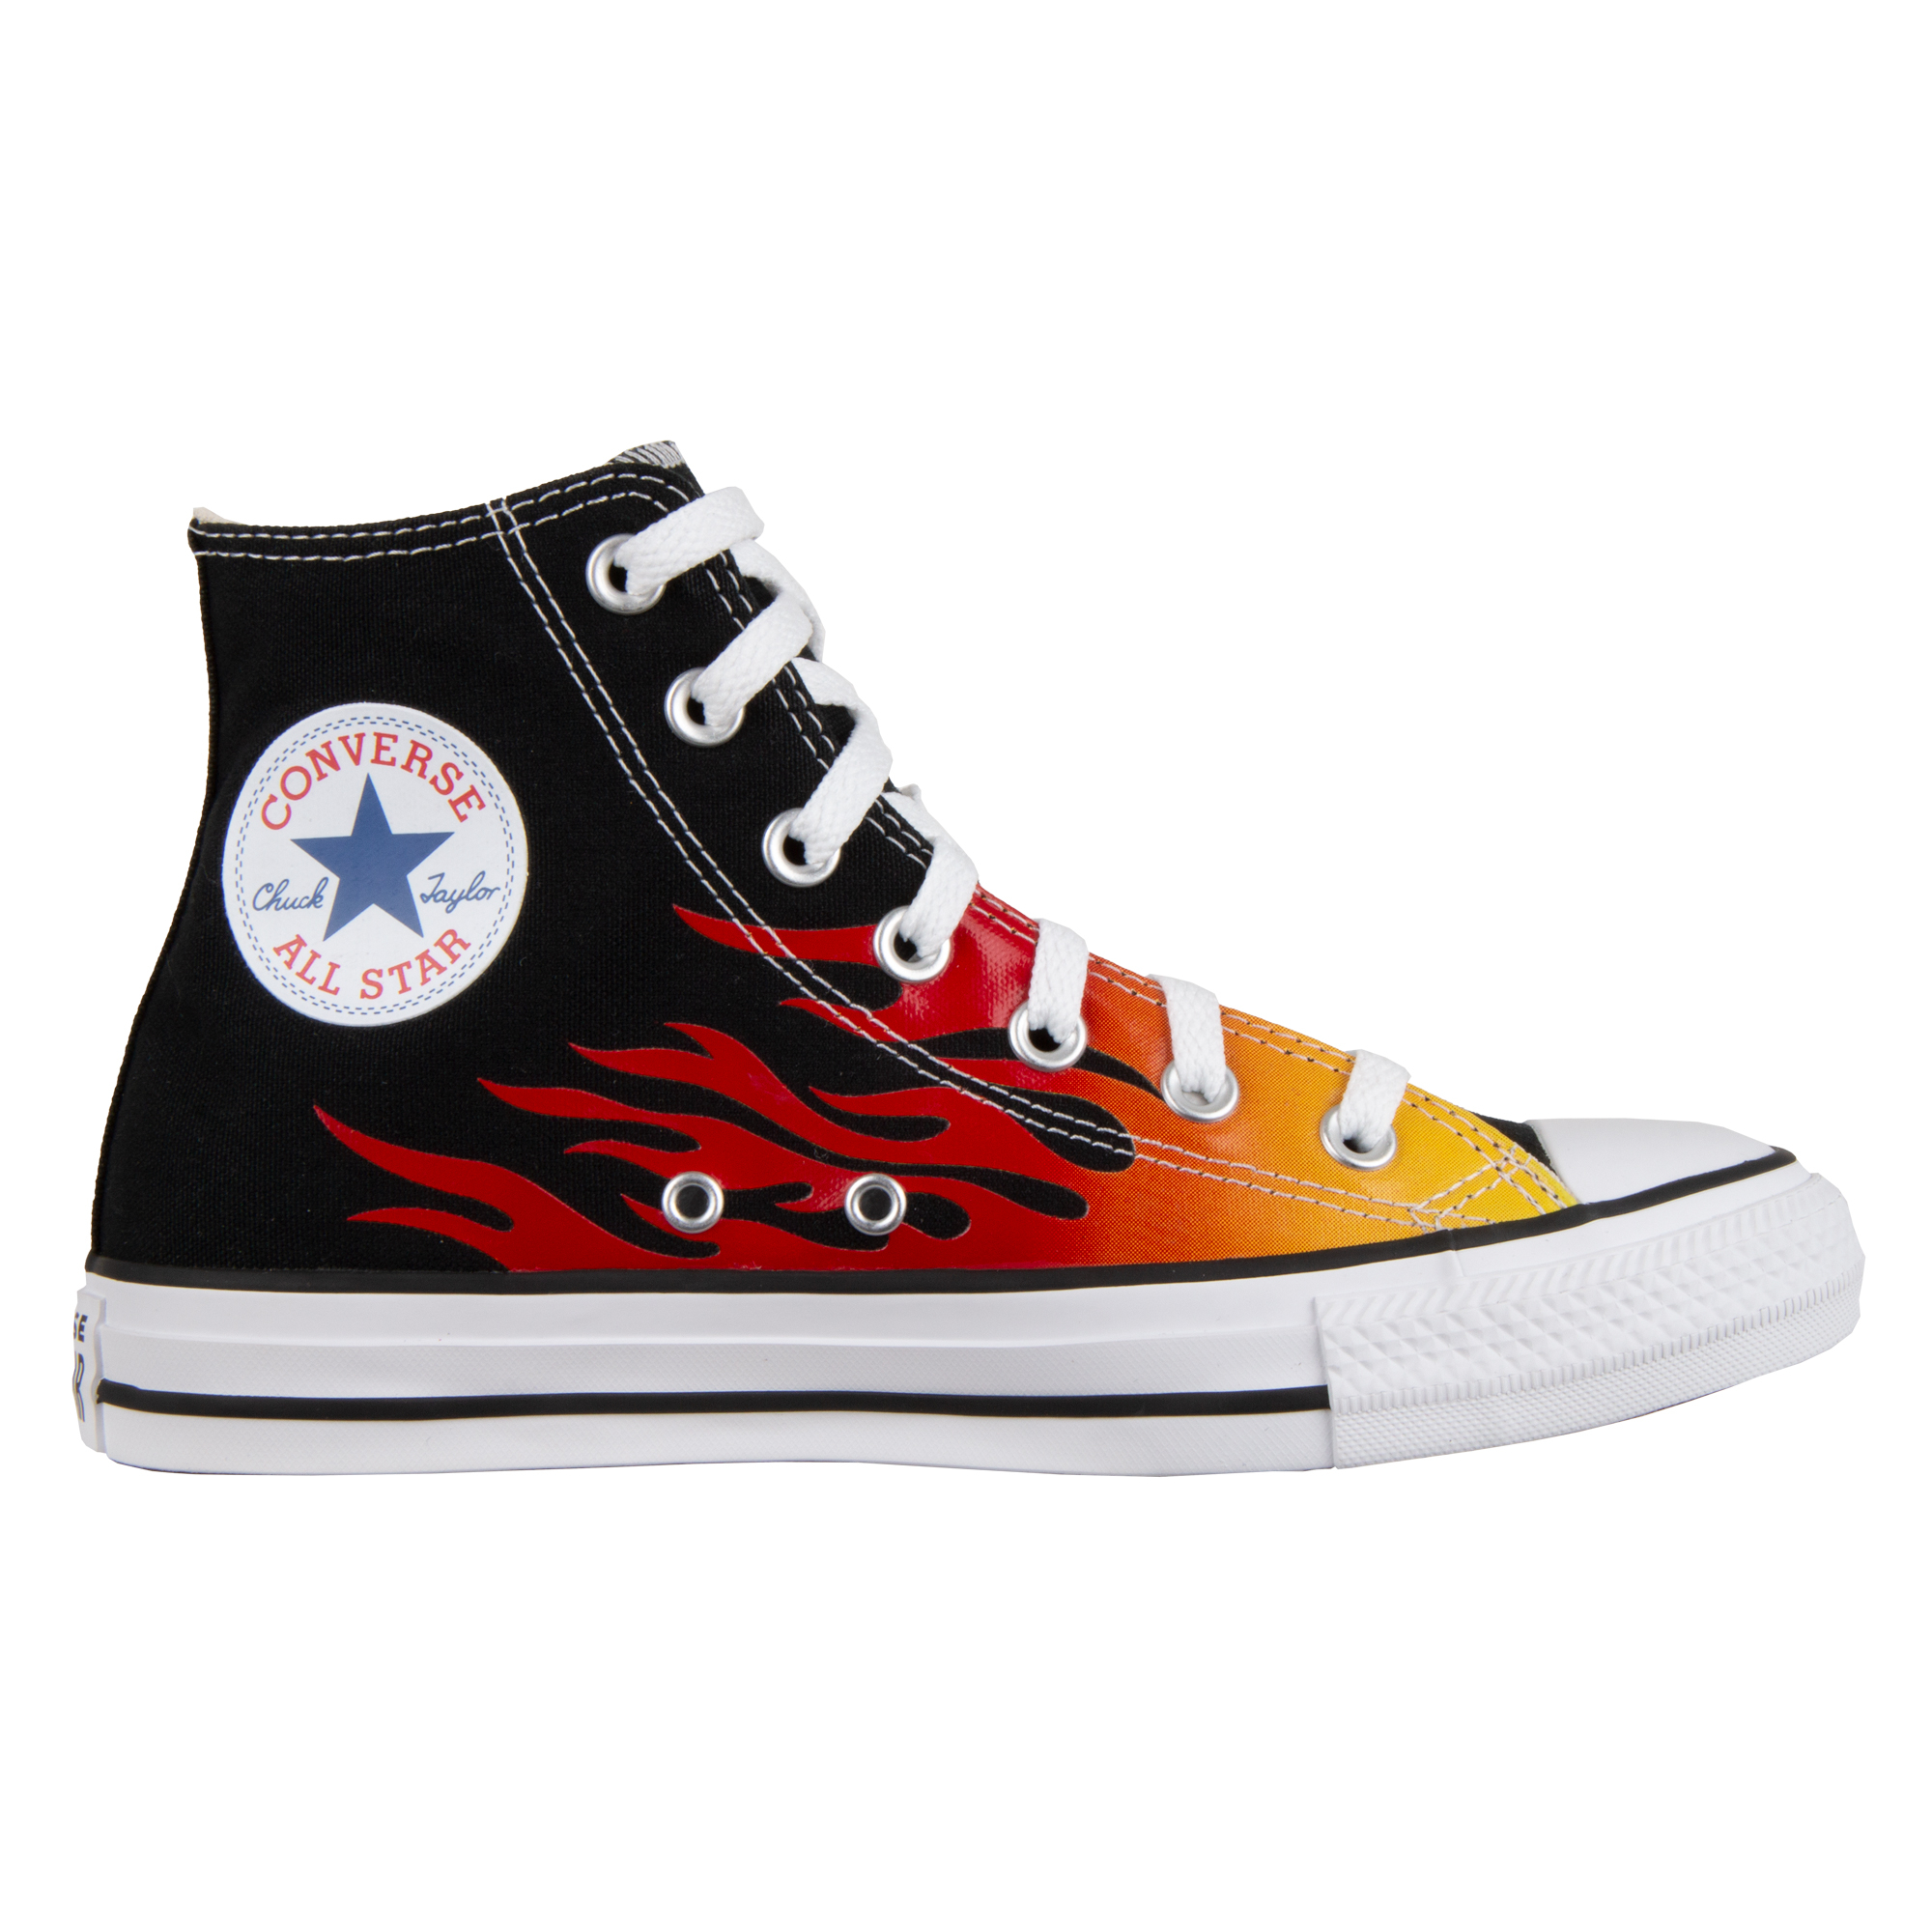 Baskets Converse Chuck Taylor All Star Hi Archive Print Adulte